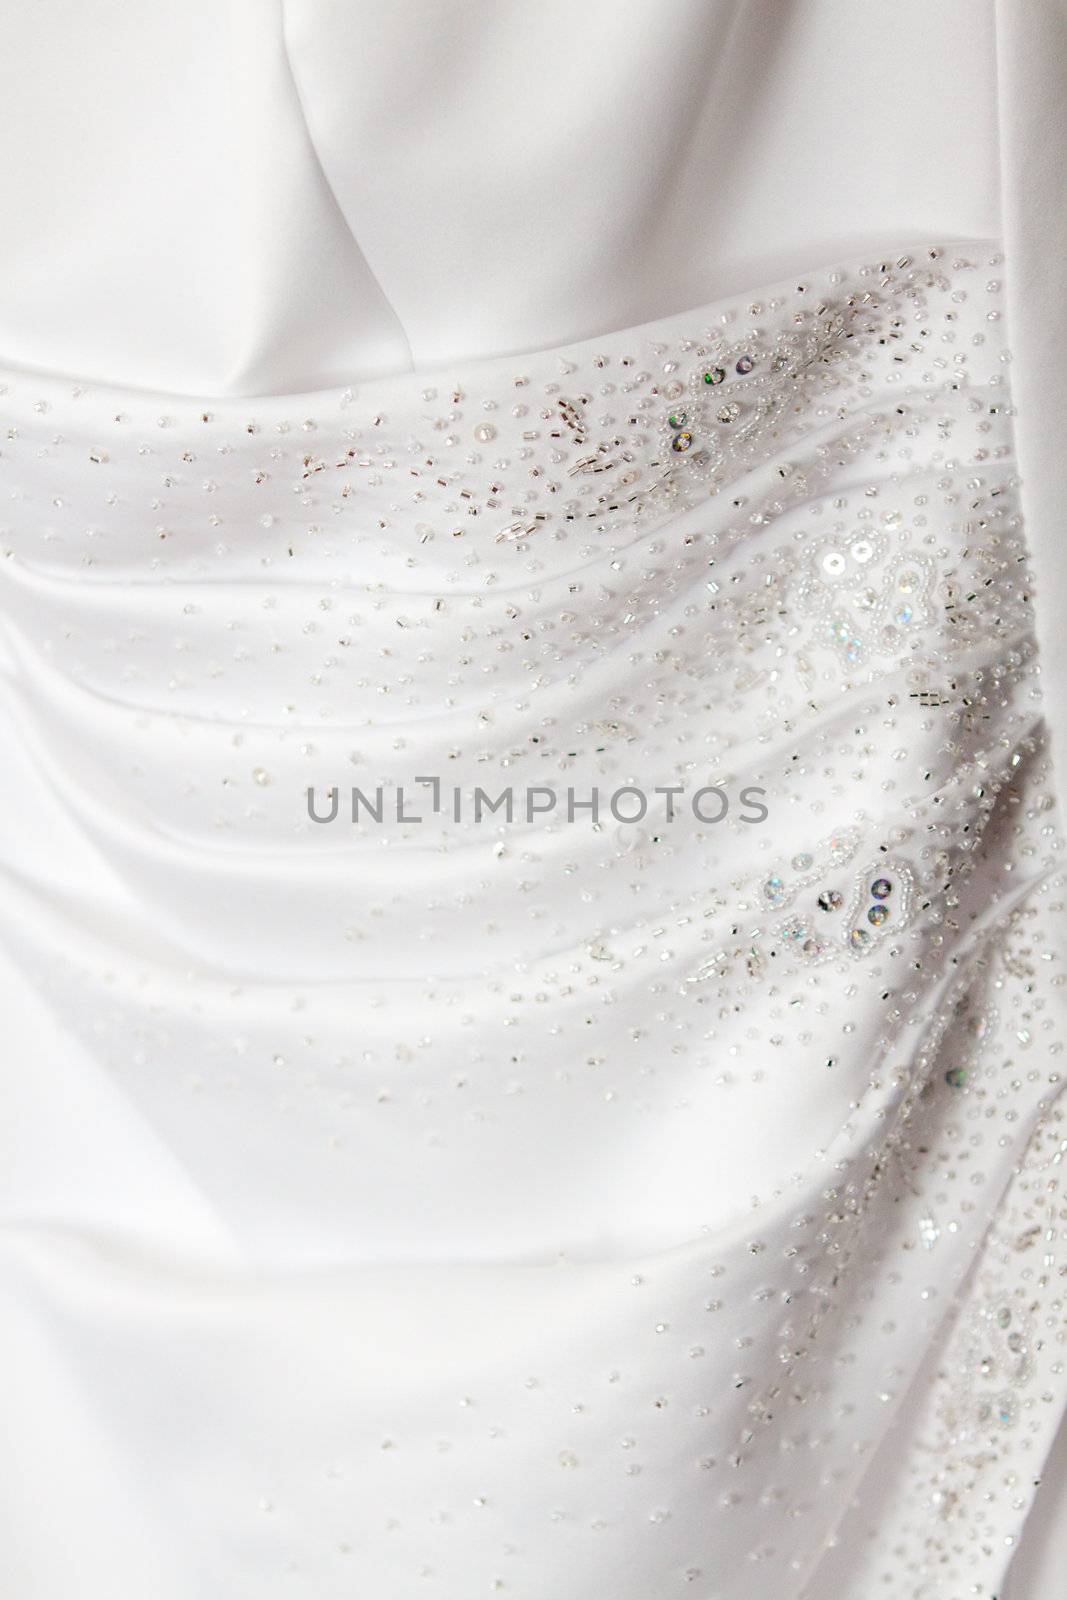 Sequins and ripples define the back detail of this beautiful wedding dress.